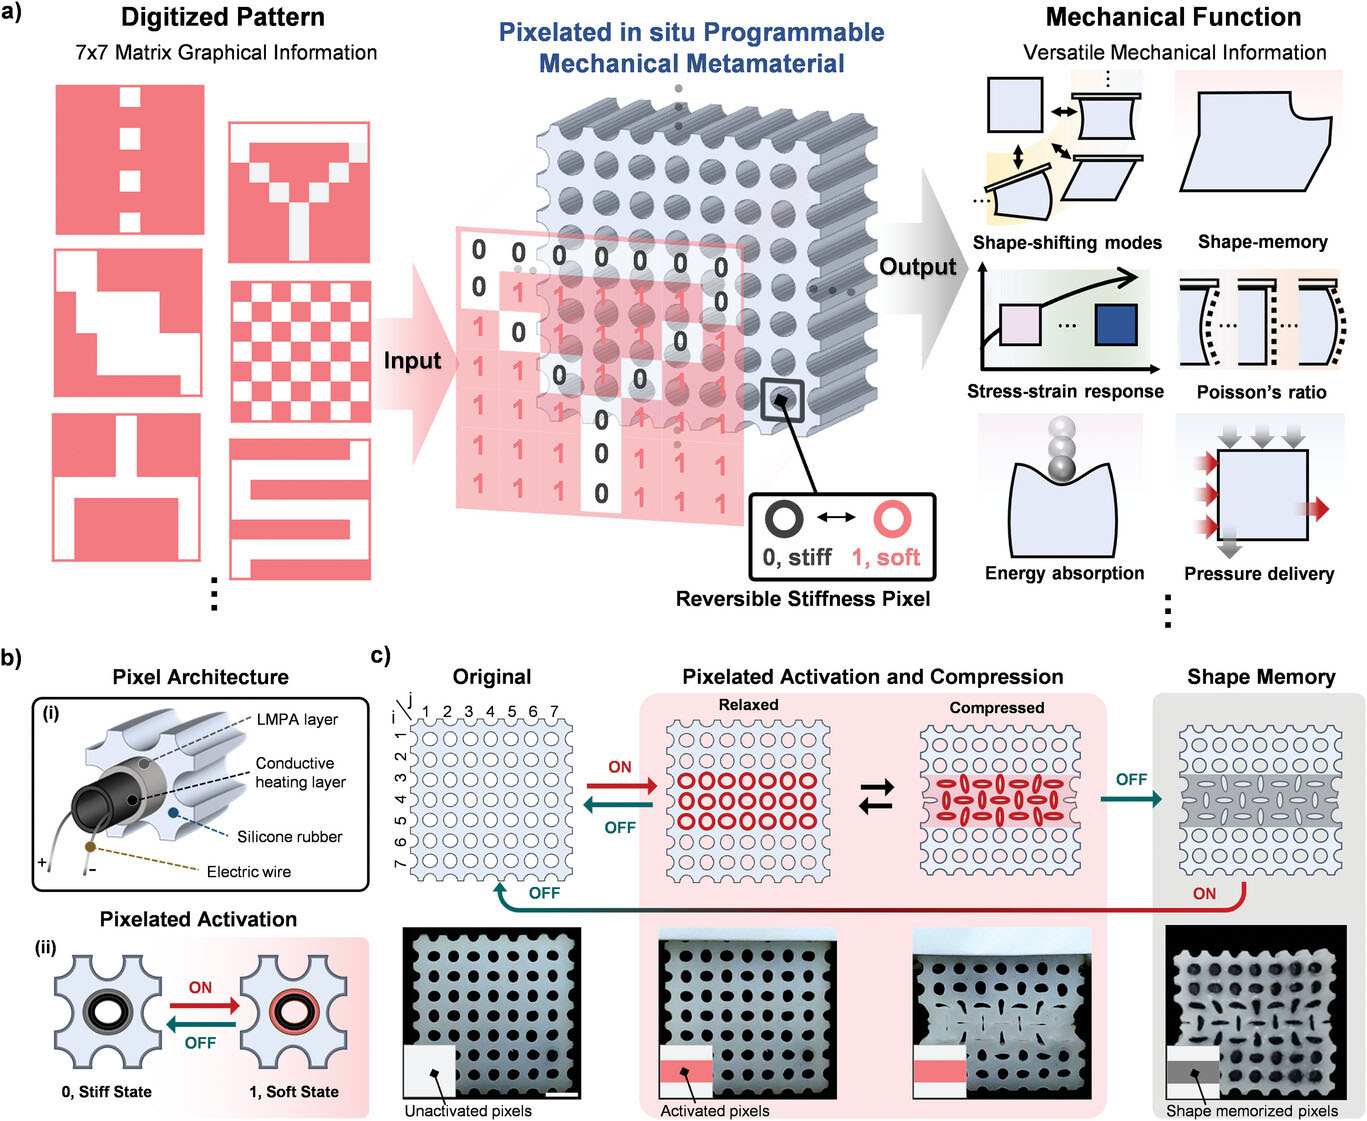 Concept and mechanism of pixelated in situ programmable mechanical metamaterial